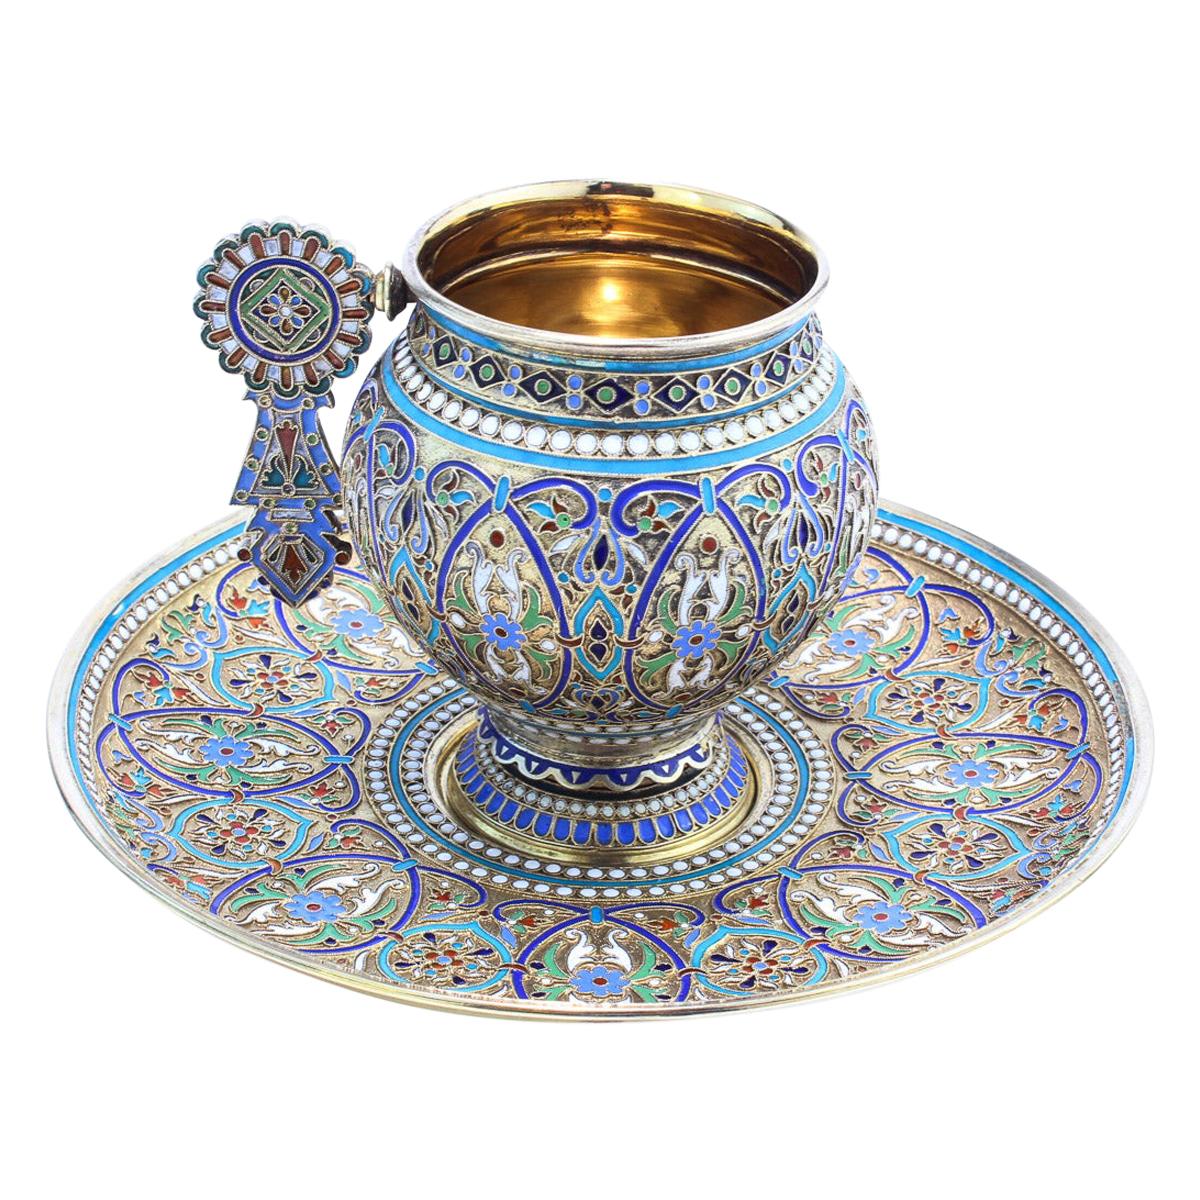 19th Century Imperial Russian Solid Silver-Gilt & Enamel Cup on Saucer, c.1887